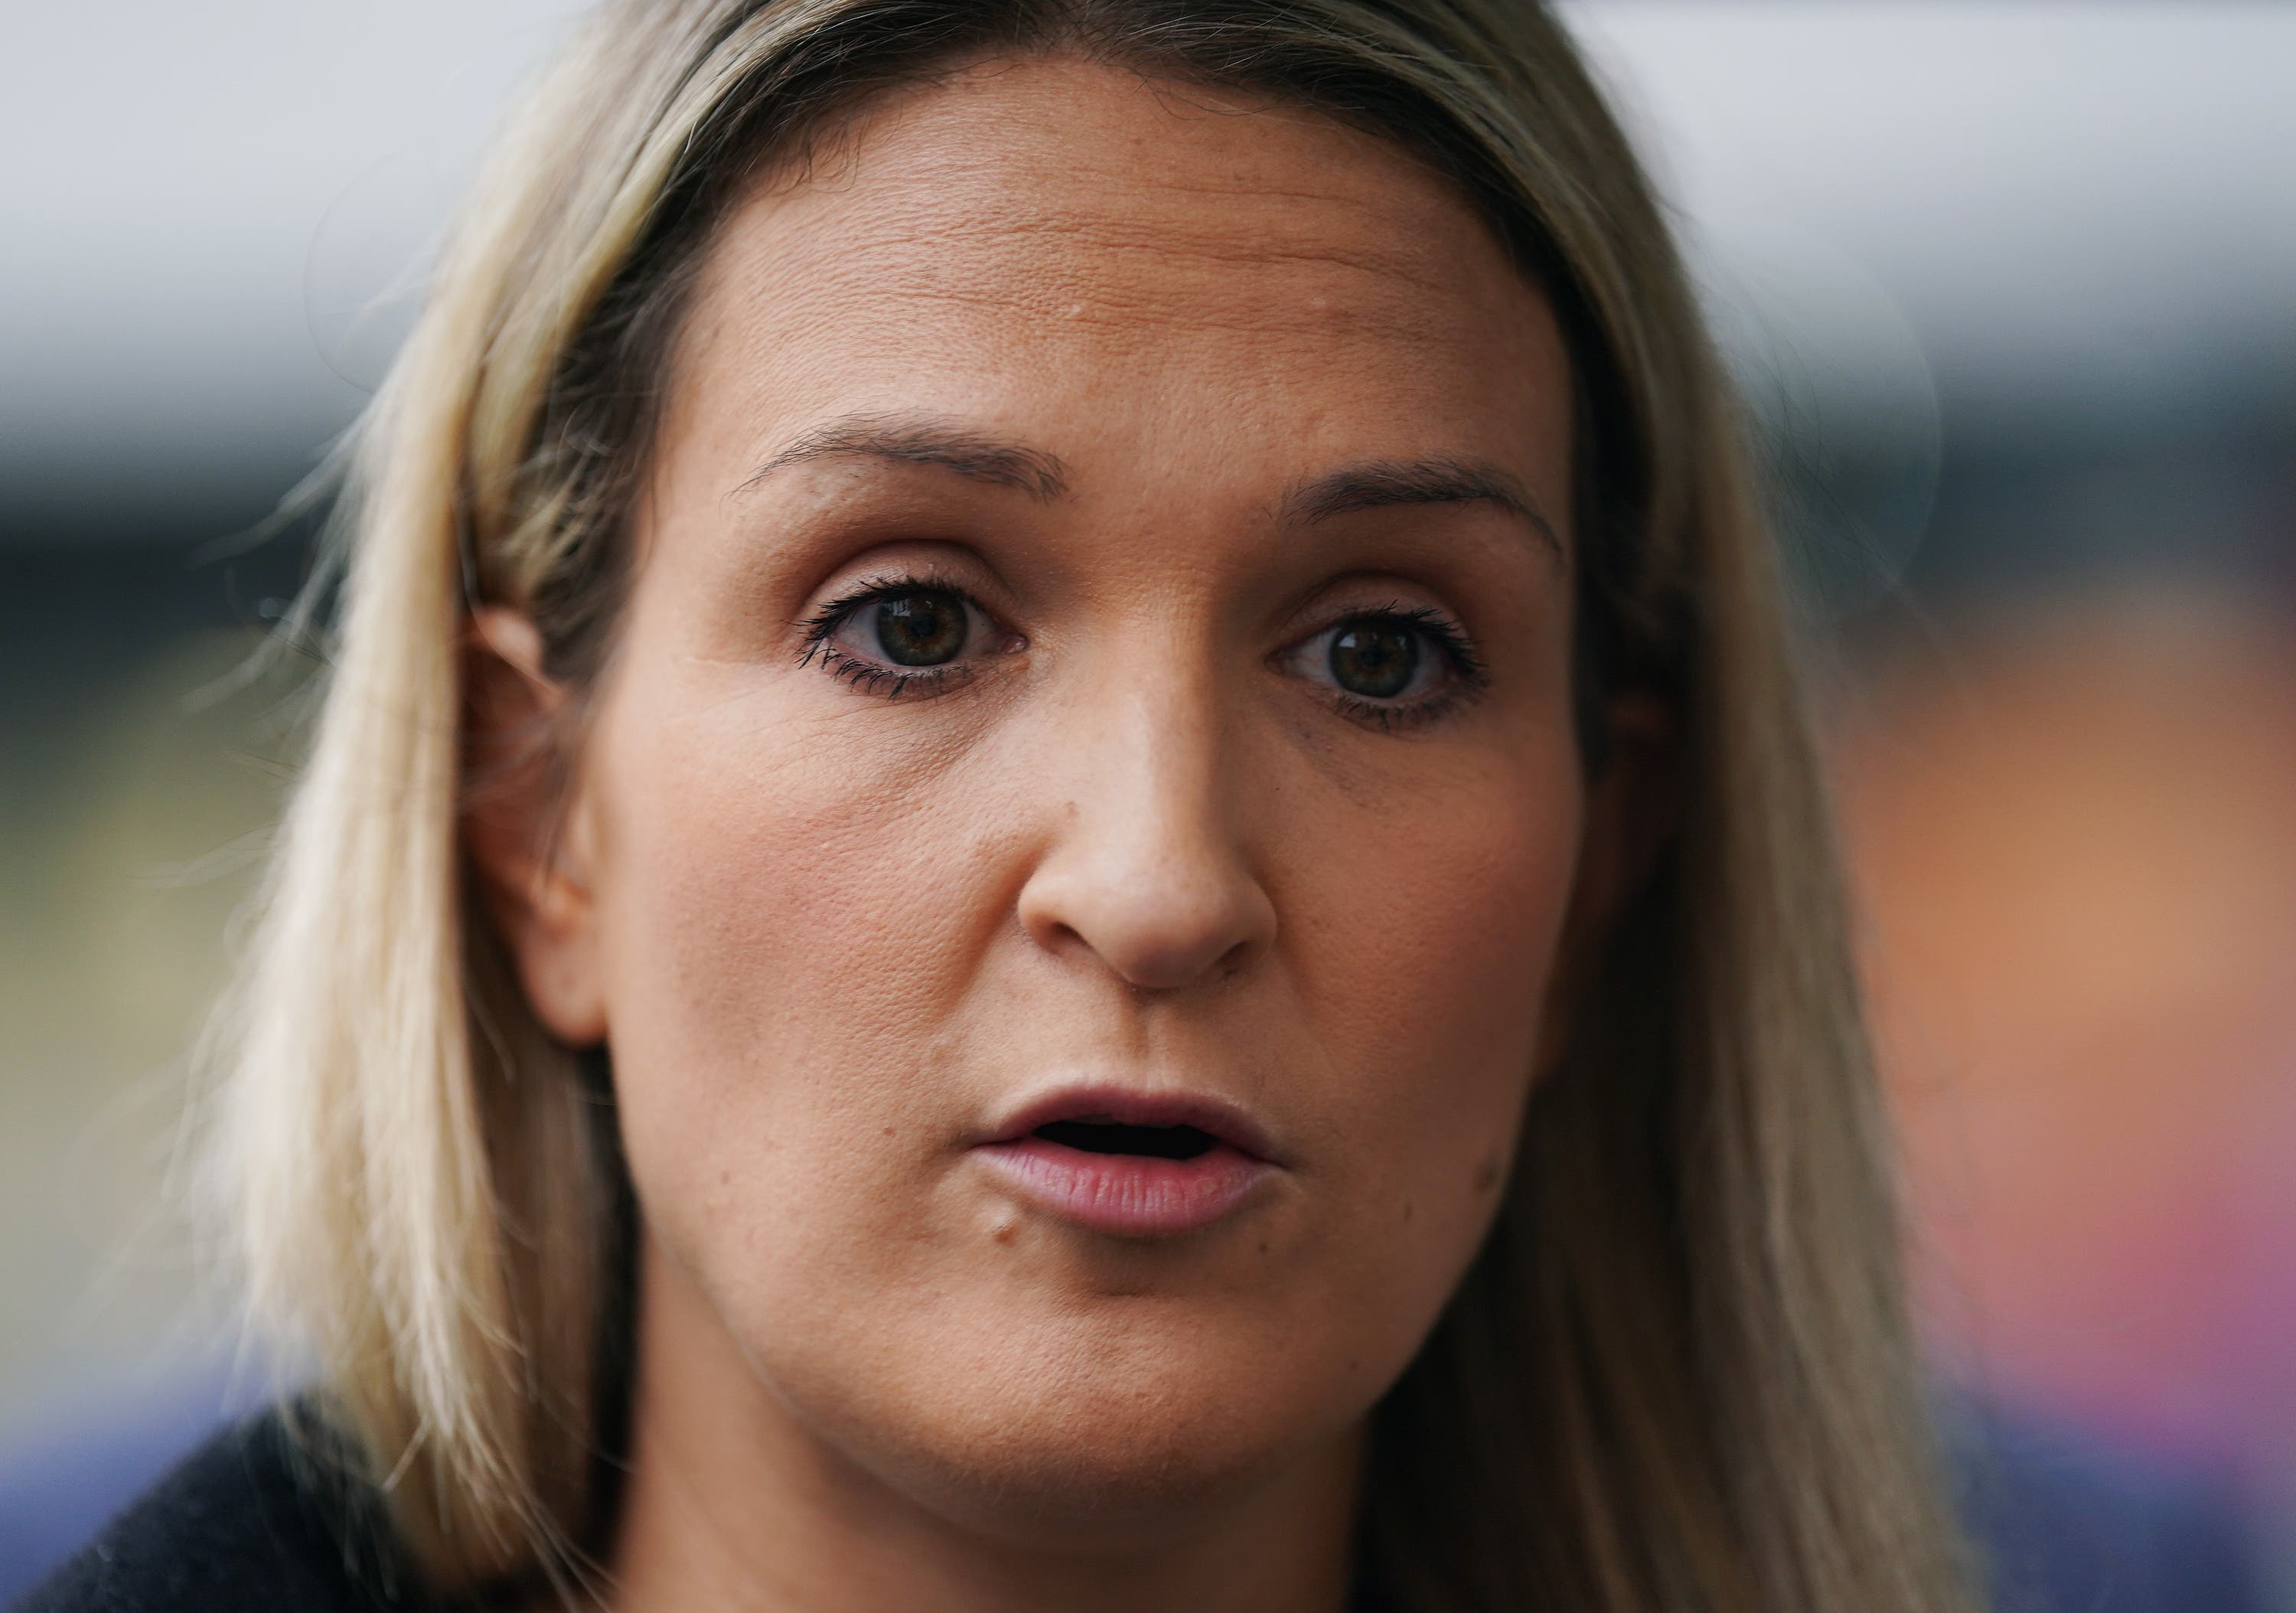 Justice Minister Helen McEntee said she was deeply shocked by the incident in Dublin.